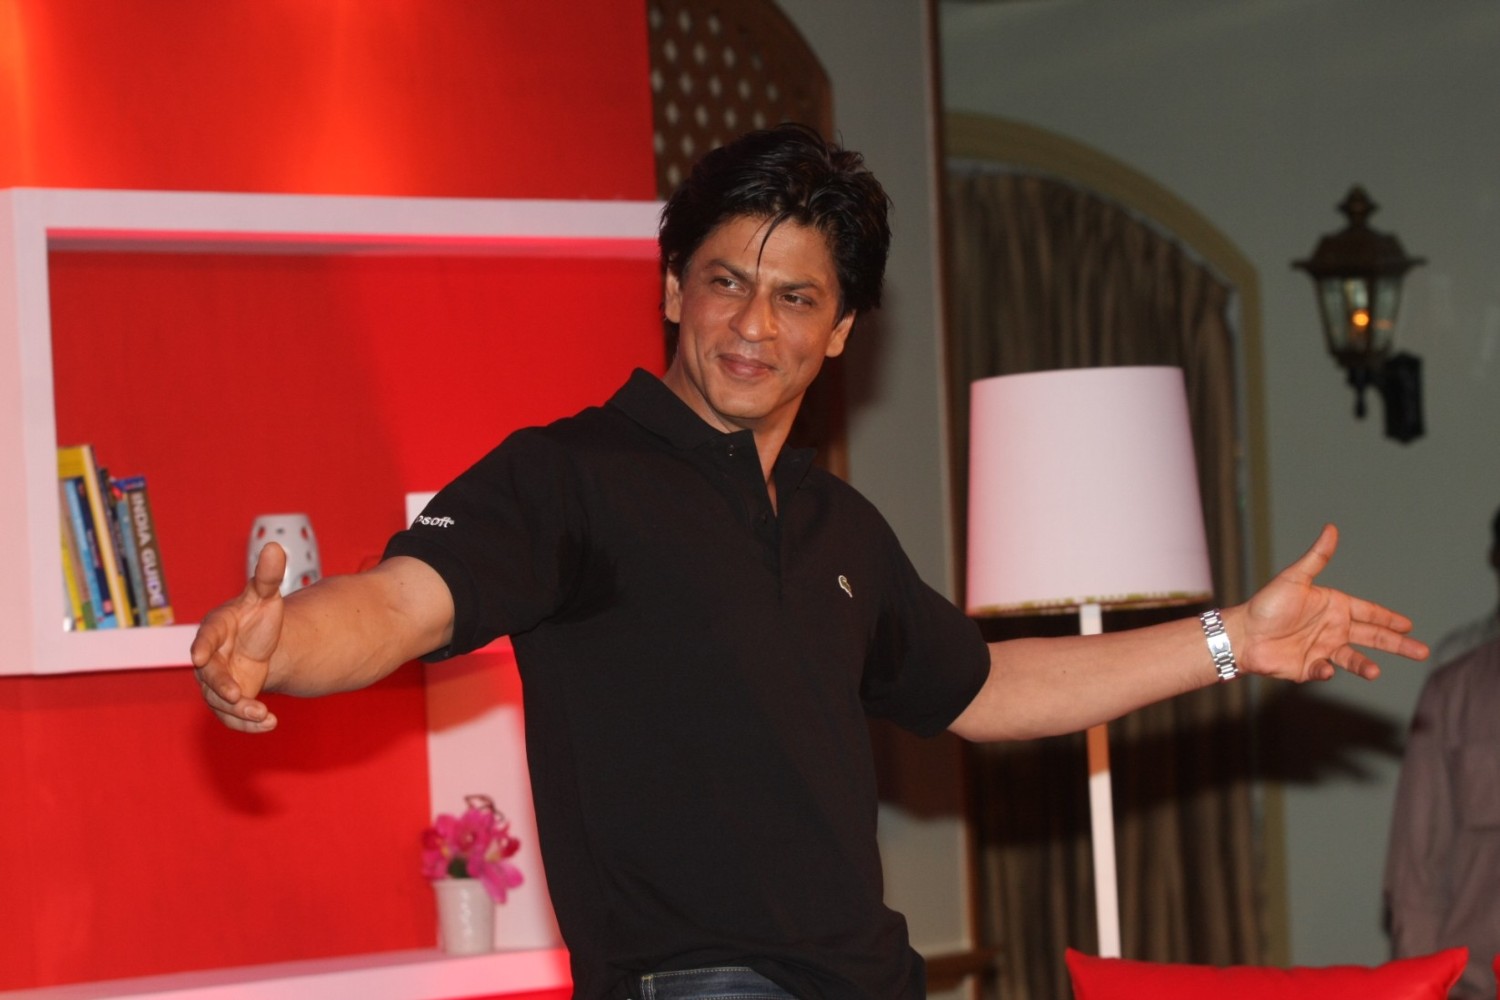 Shah Rukh Khan's Romantic Pose with Signature